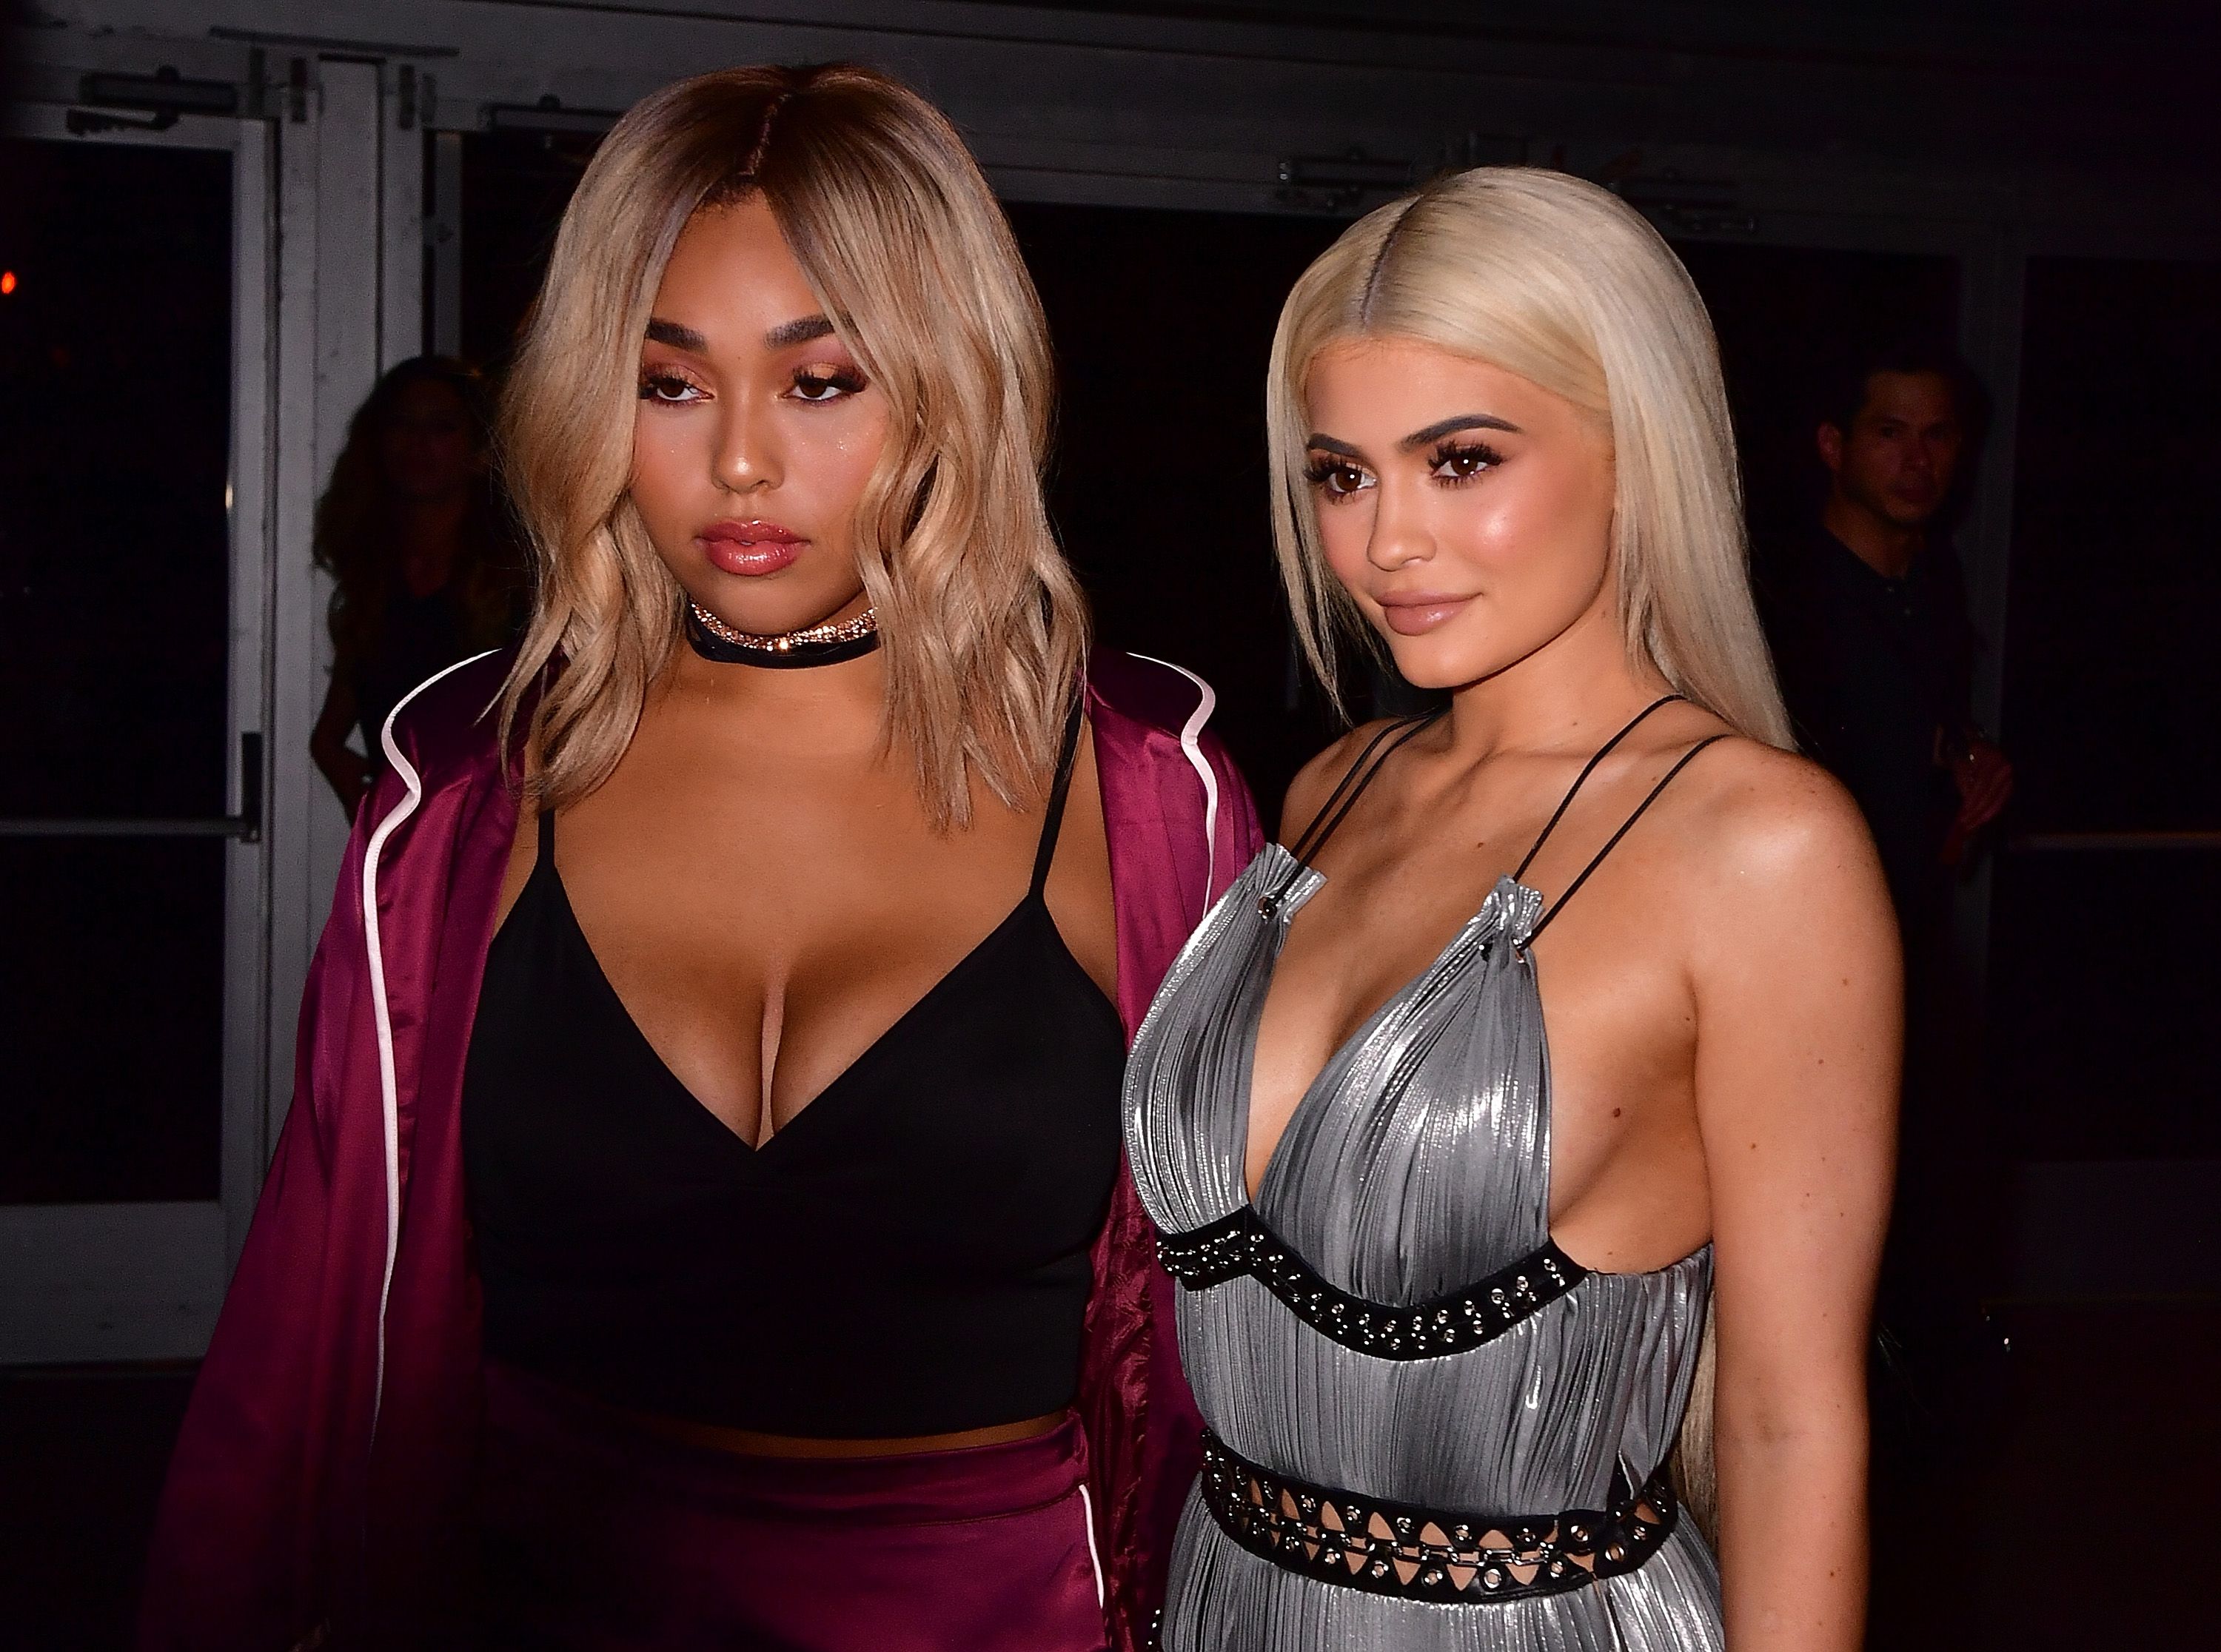 See photos of Kylie Jenner and ex-best friend Jordyn Woods reuniting